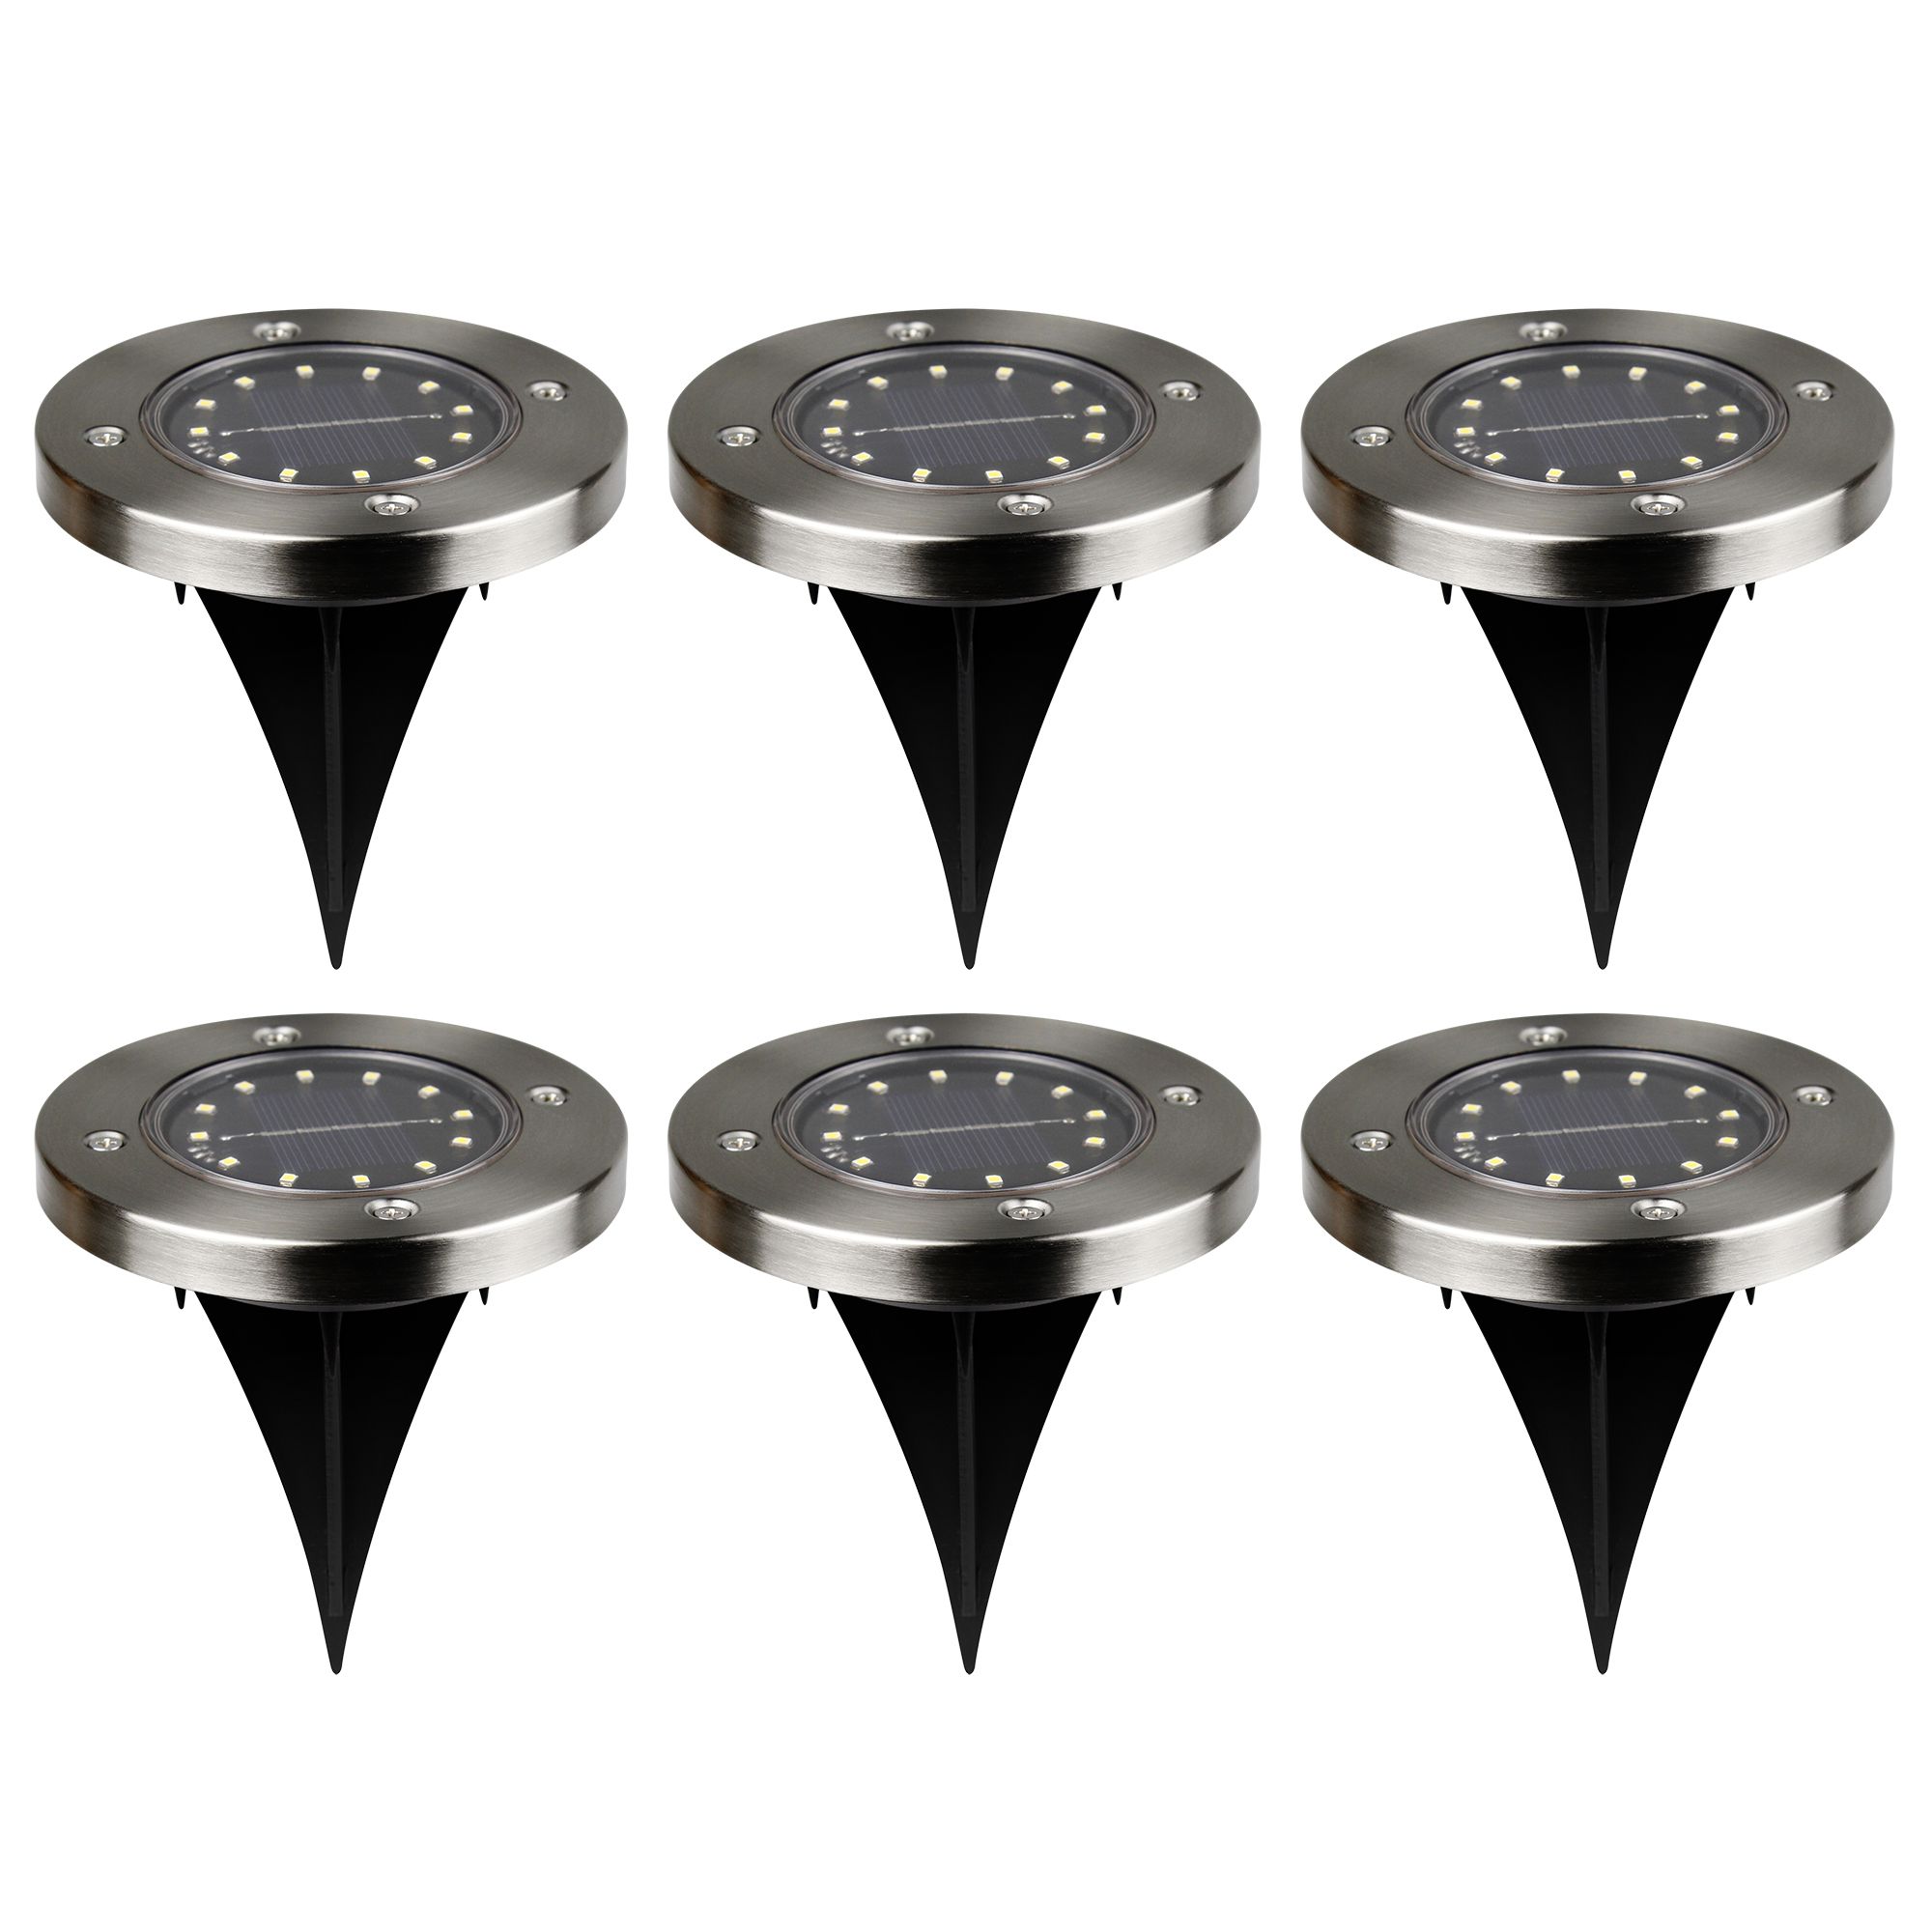 Gavea Stainless steel effect Solar-powered Integrated LED Outdoor Ground light, Pack of 6